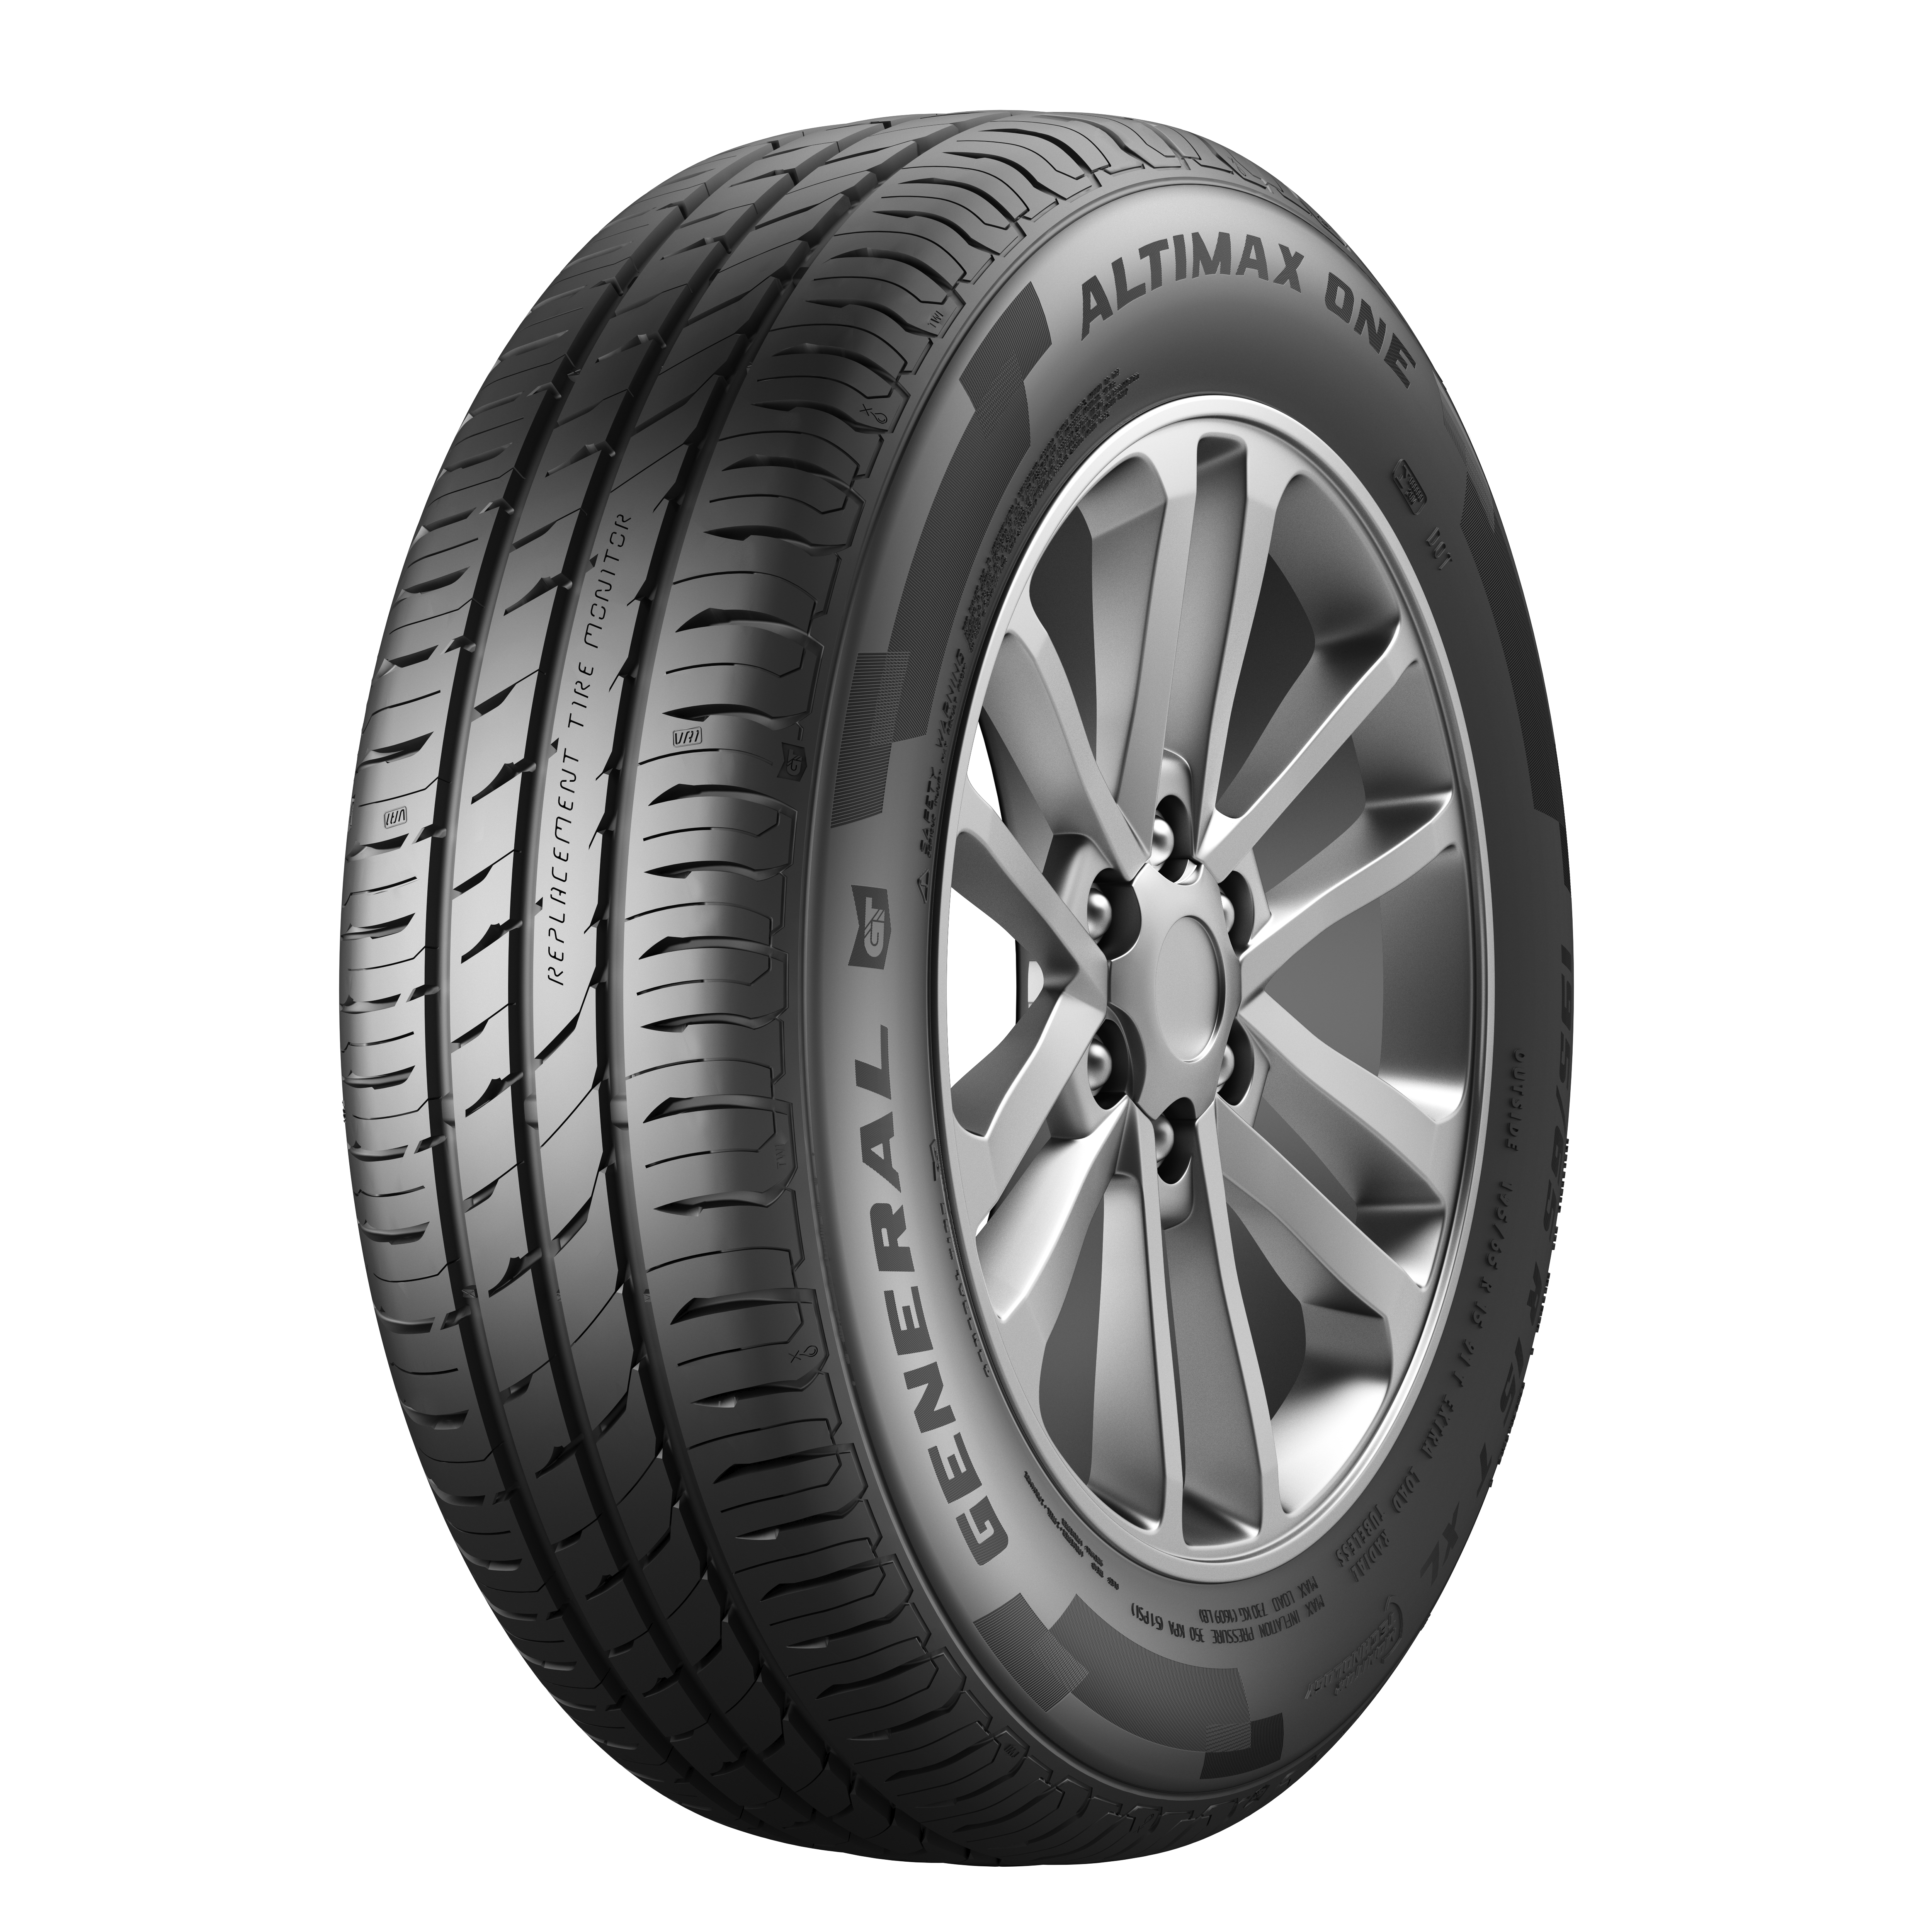 GENERAL TIRE ALTIMAX ONE S 185/50R16 81V